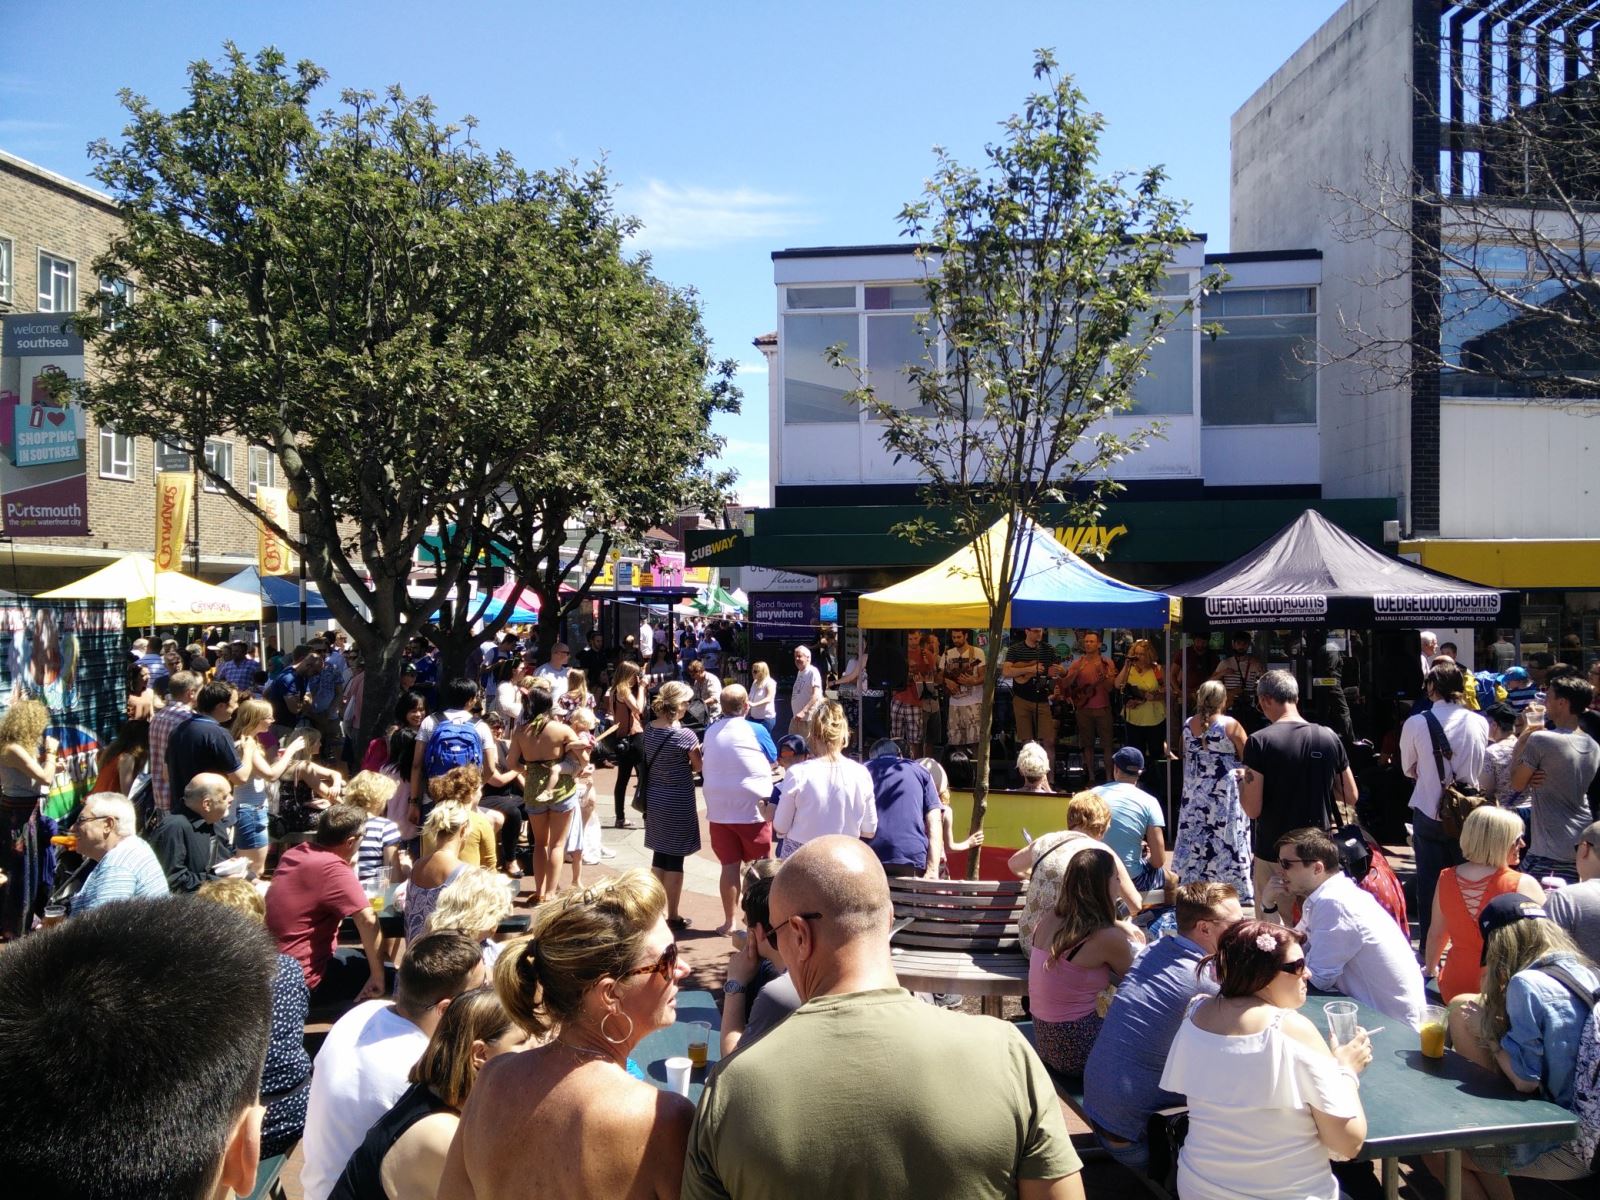 People gathered for Southsea Food Festival